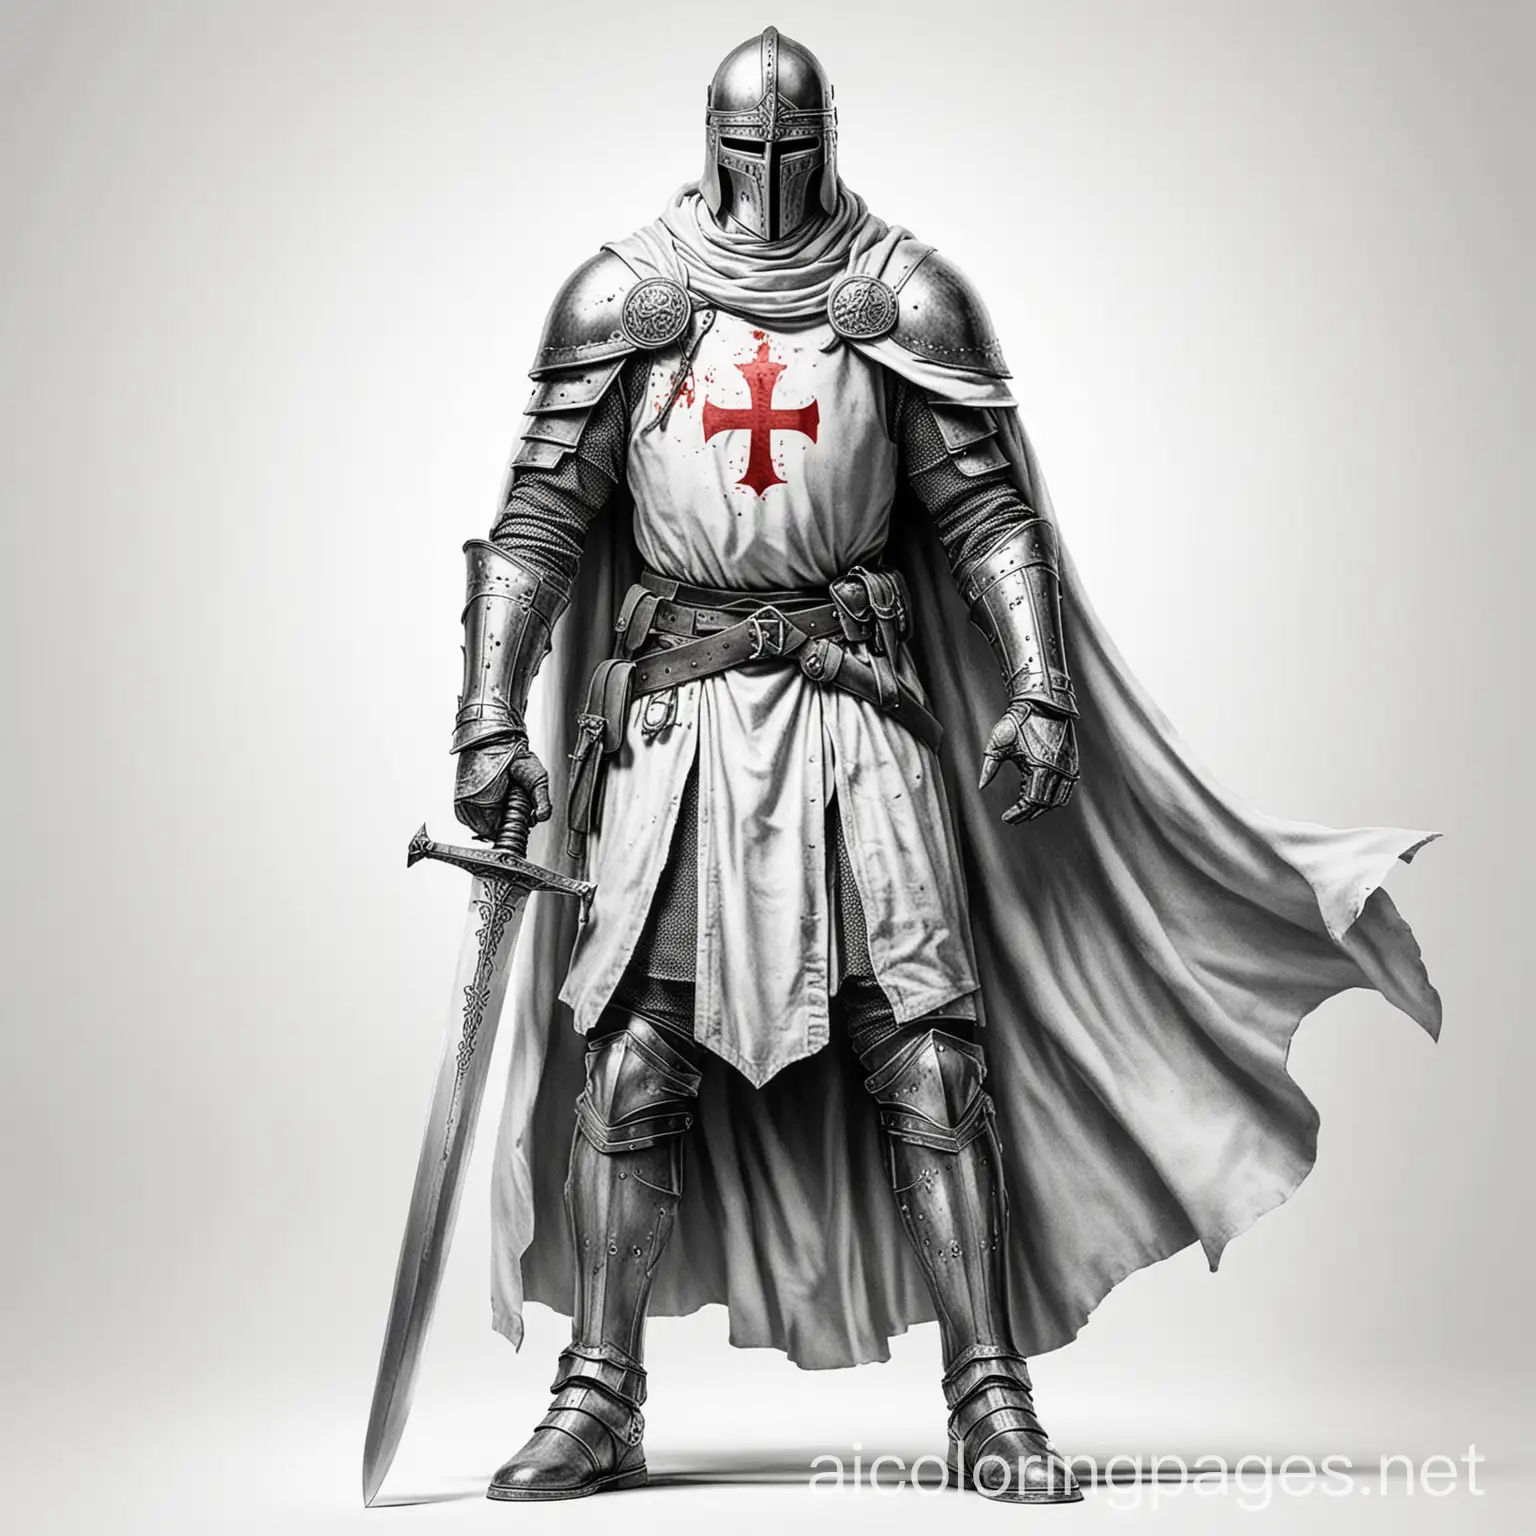 knight templar with a sword, Coloring Page, black and white, line art, white background, Simplicity, Ample White Space. The background of the coloring page is plain white to make it easy for young children to color within the lines. The outlines of all the subjects are easy to distinguish, making it simple for kids to color without too much difficulty